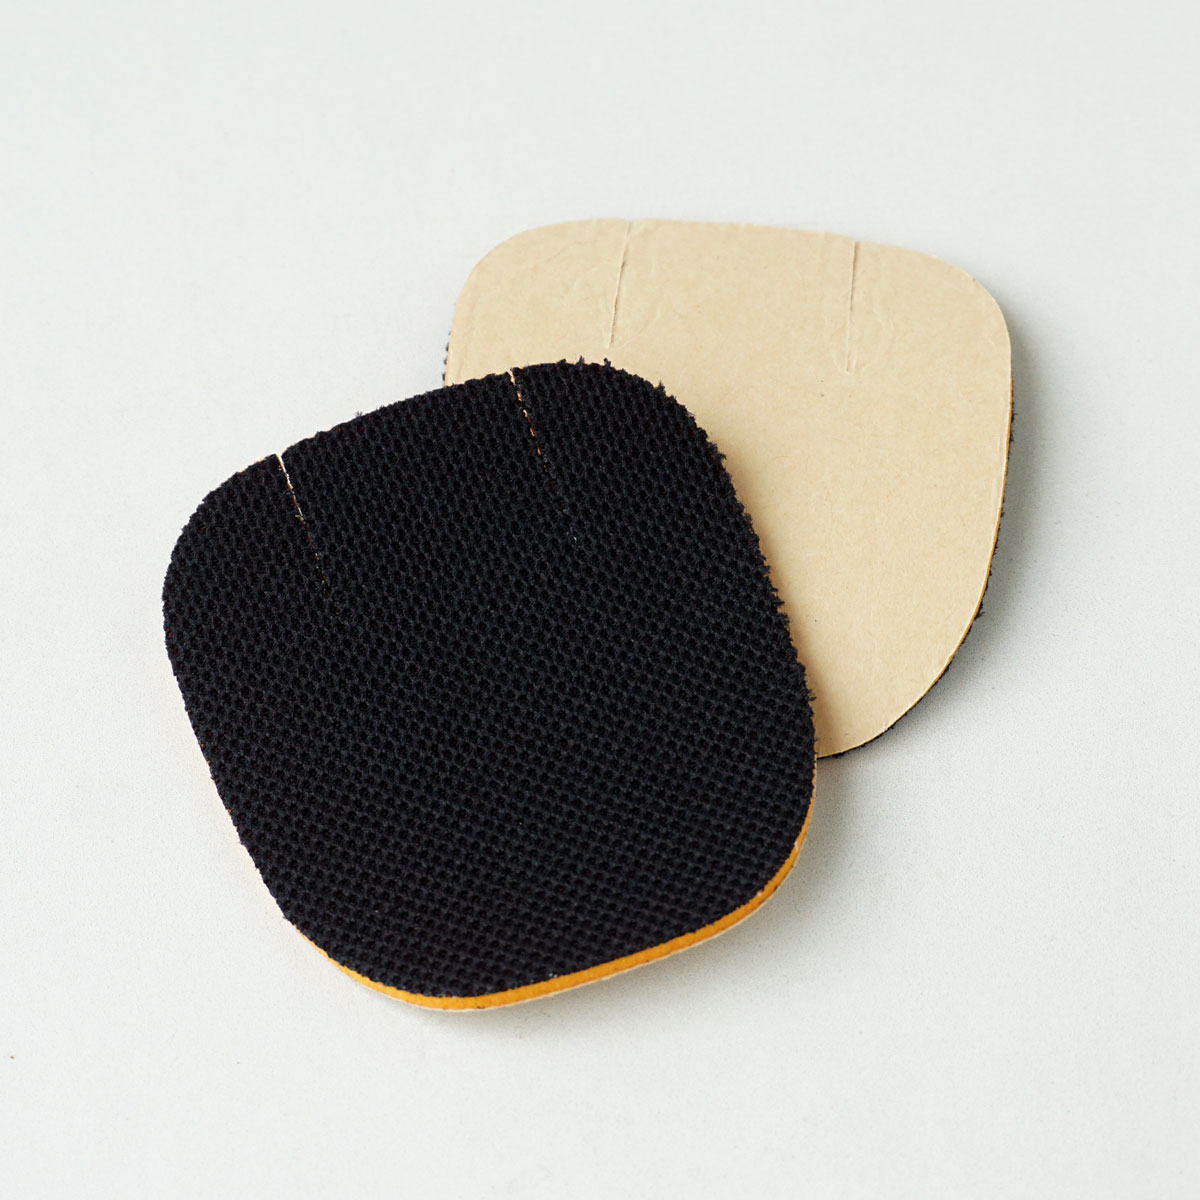 . reverse side pad 1 pair minute (2 sheets ) tongue pad size adjustment shoes scrub shoes gap . comming off large small shoes pair. . support shoe tongue pad made in Japan PAD11